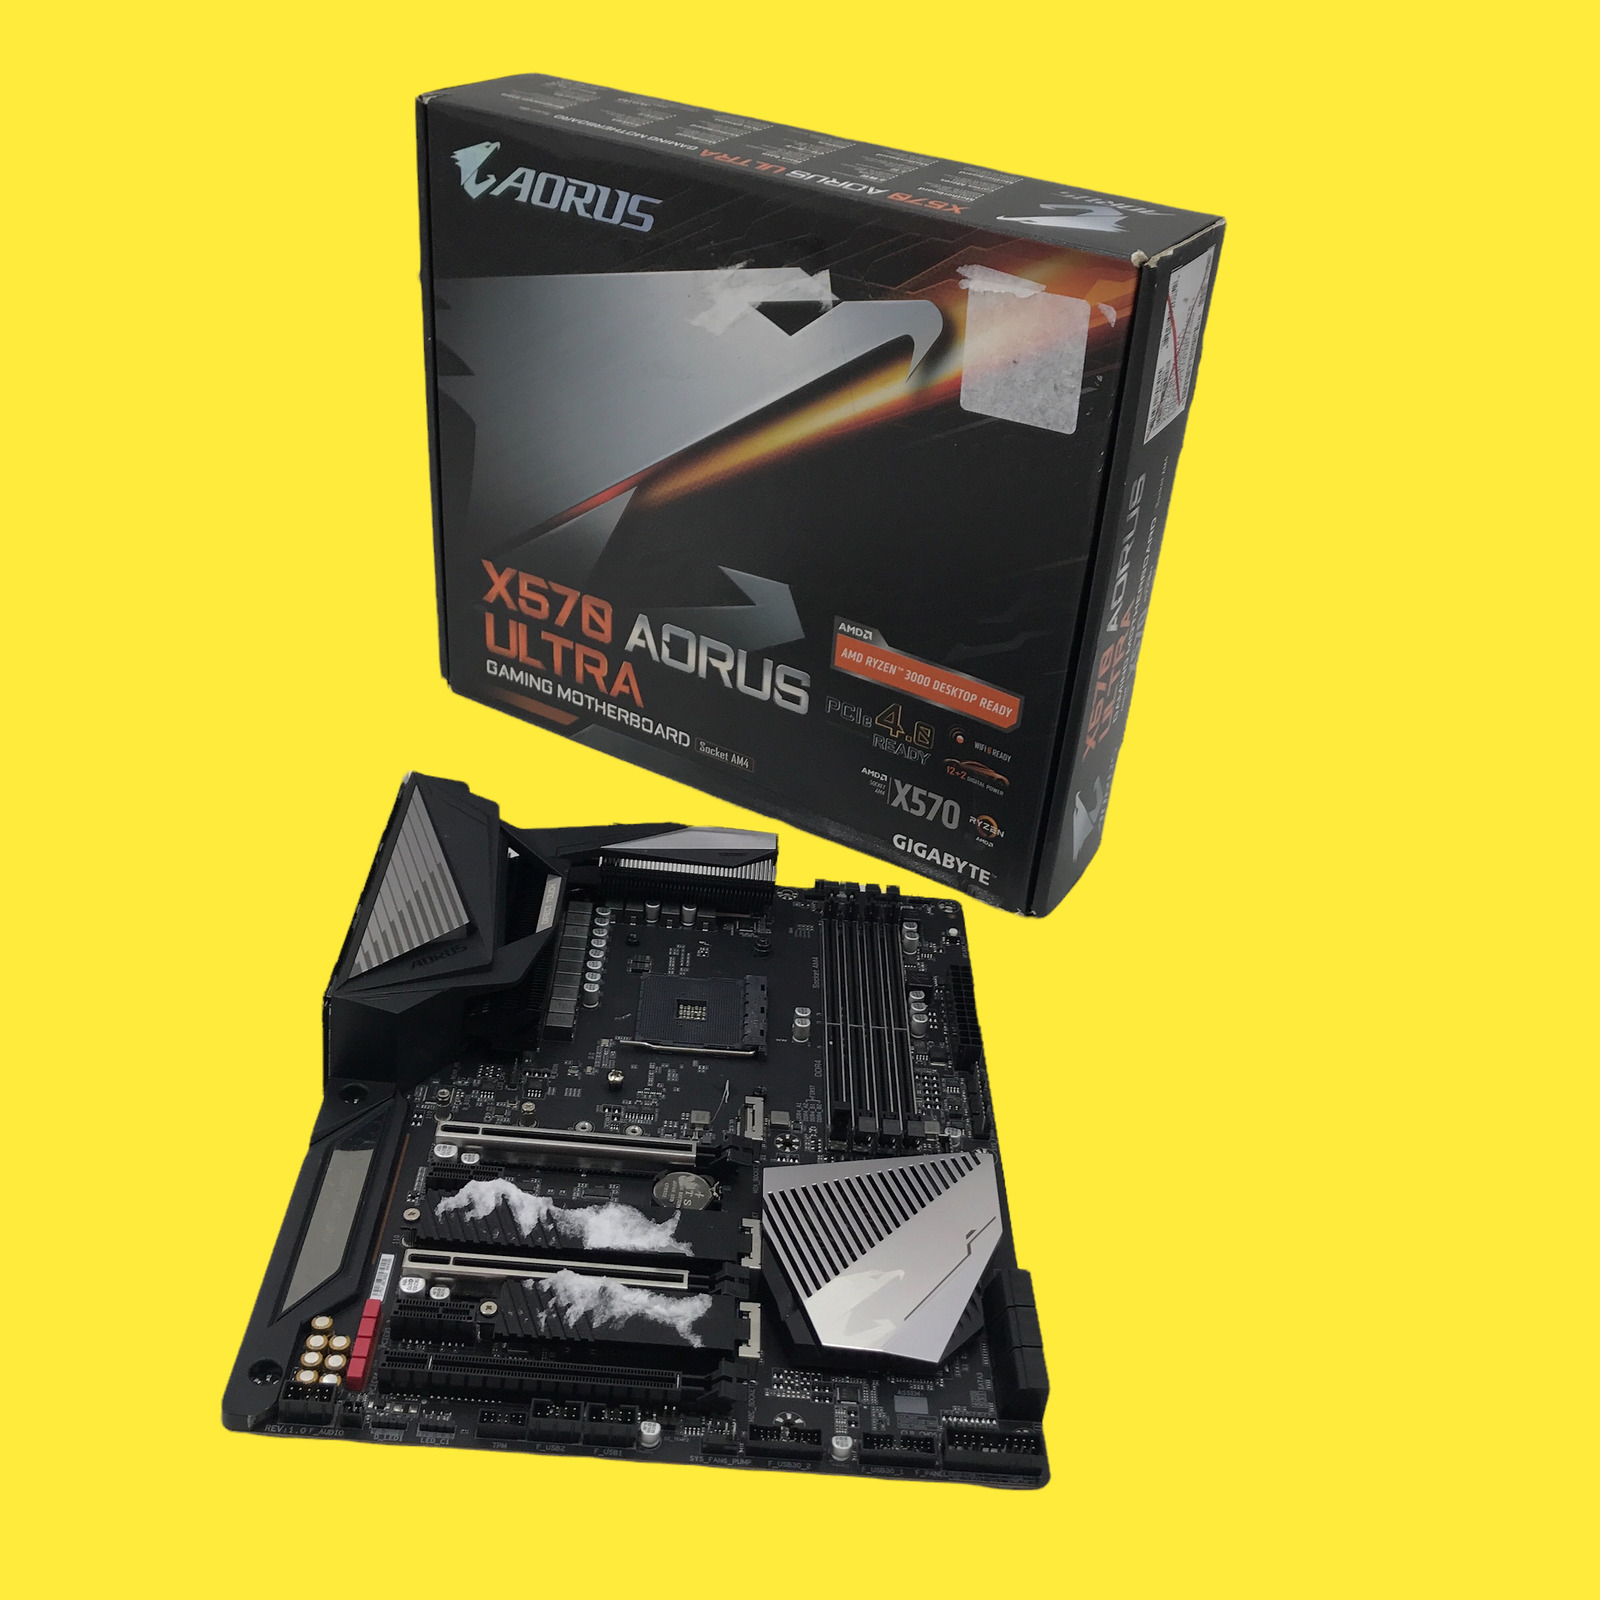 FOR PARTS Gigabyte X570 AM4 ATX M.2 AORUS ULTRA AMD Motherboard #FP7852